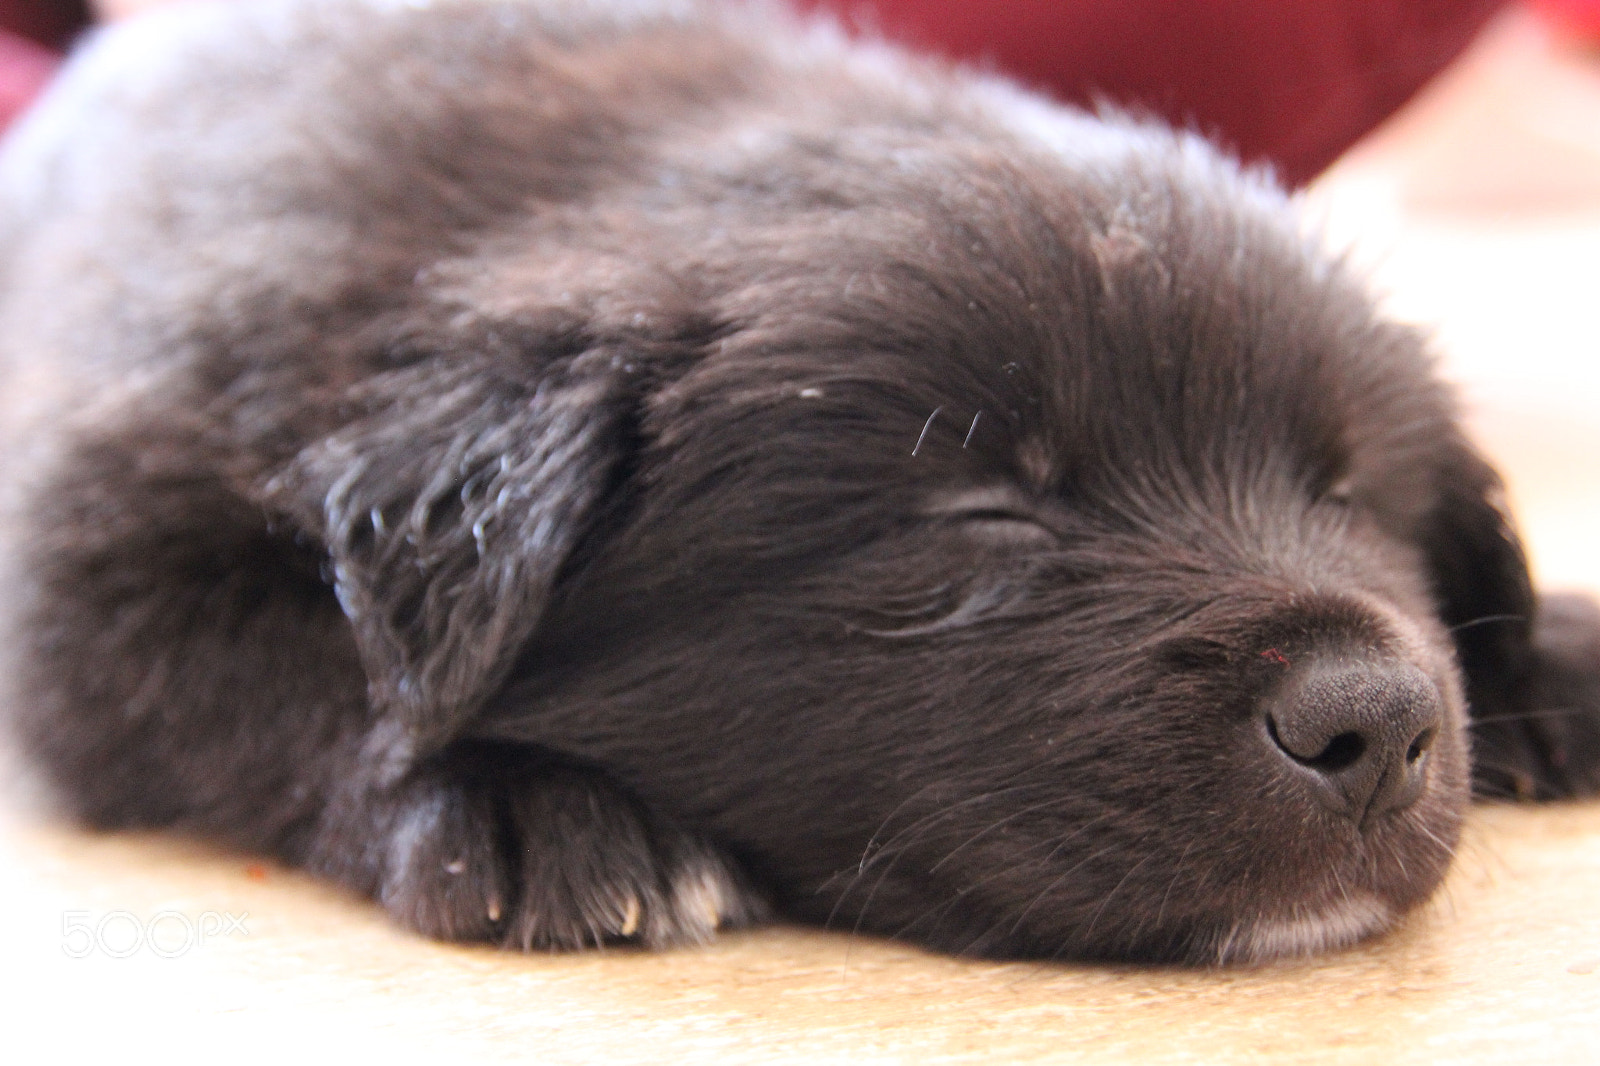 Tamron AF 18-250mm F3.5-6.3 Di II LD Aspherical (IF) Macro sample photo. Sleeping little puppy photography